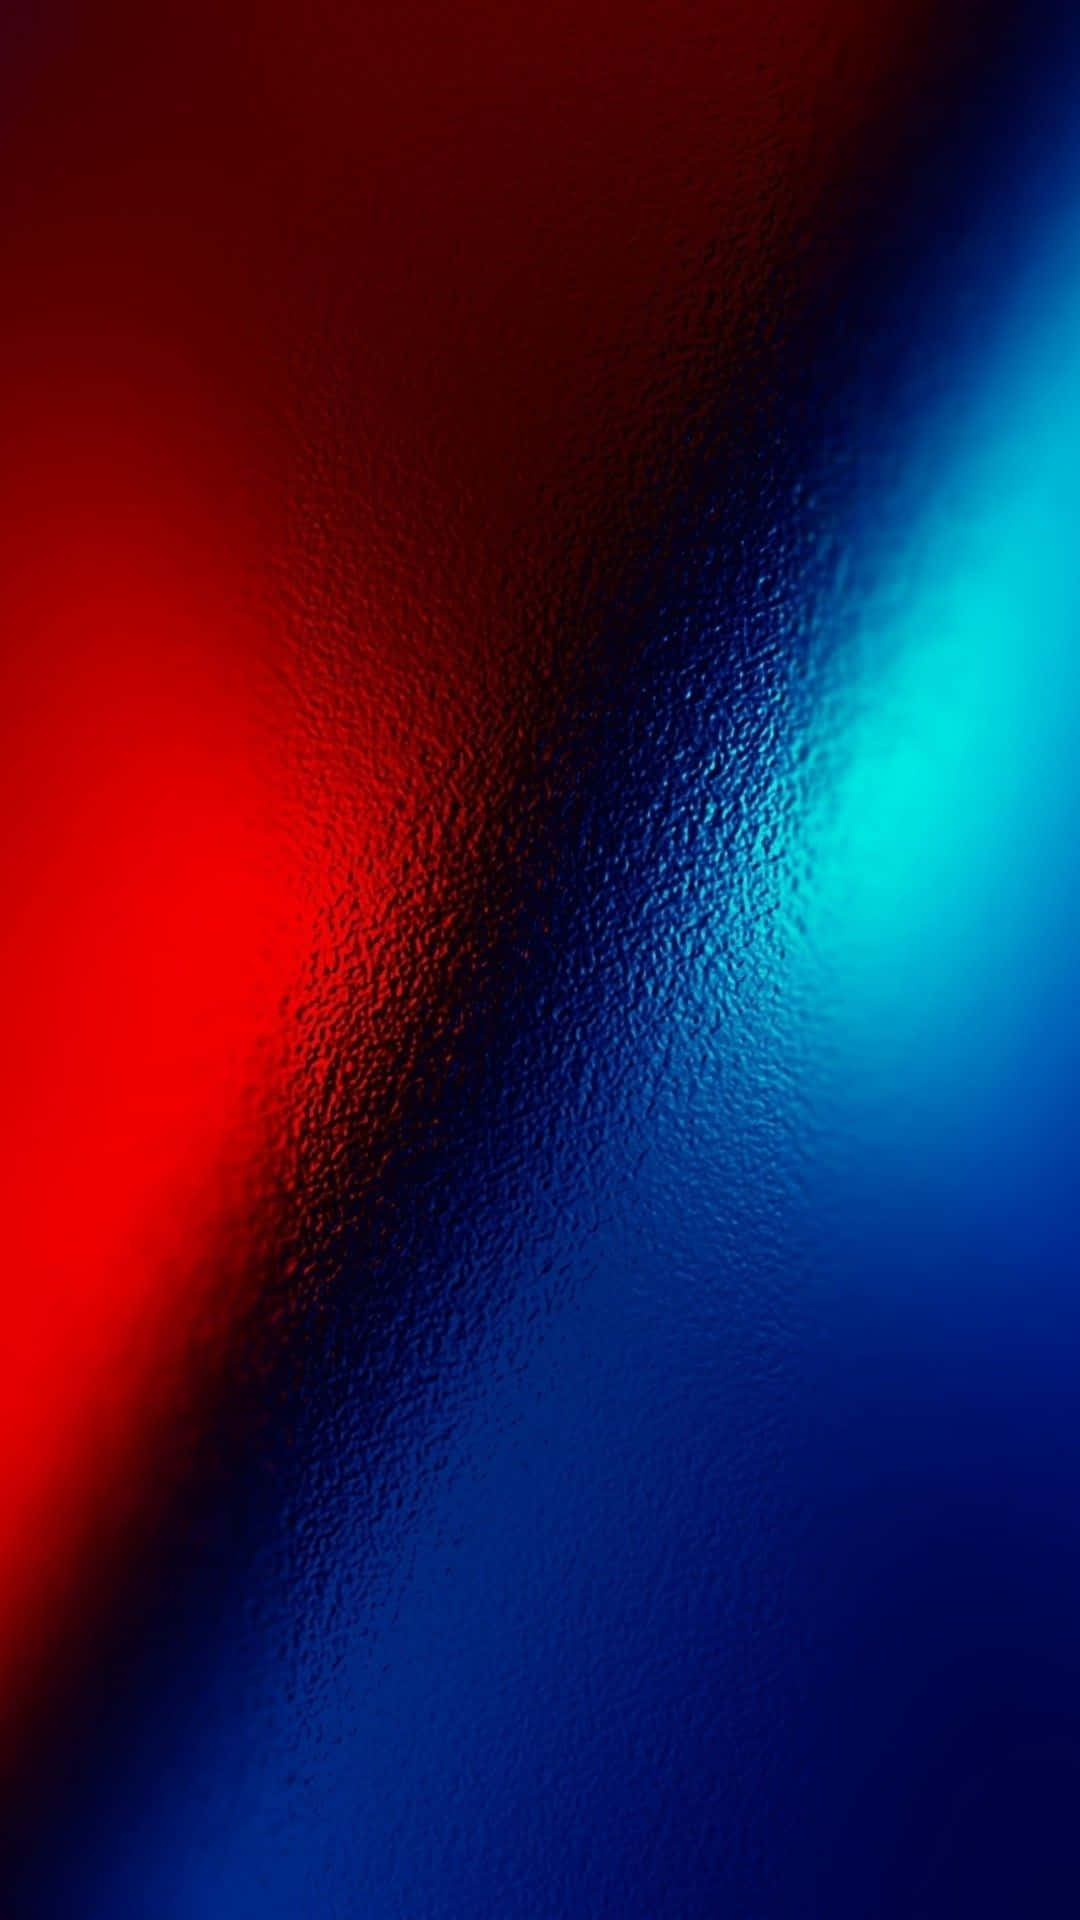 "A stimulating mix of blue and red in an abstract background."